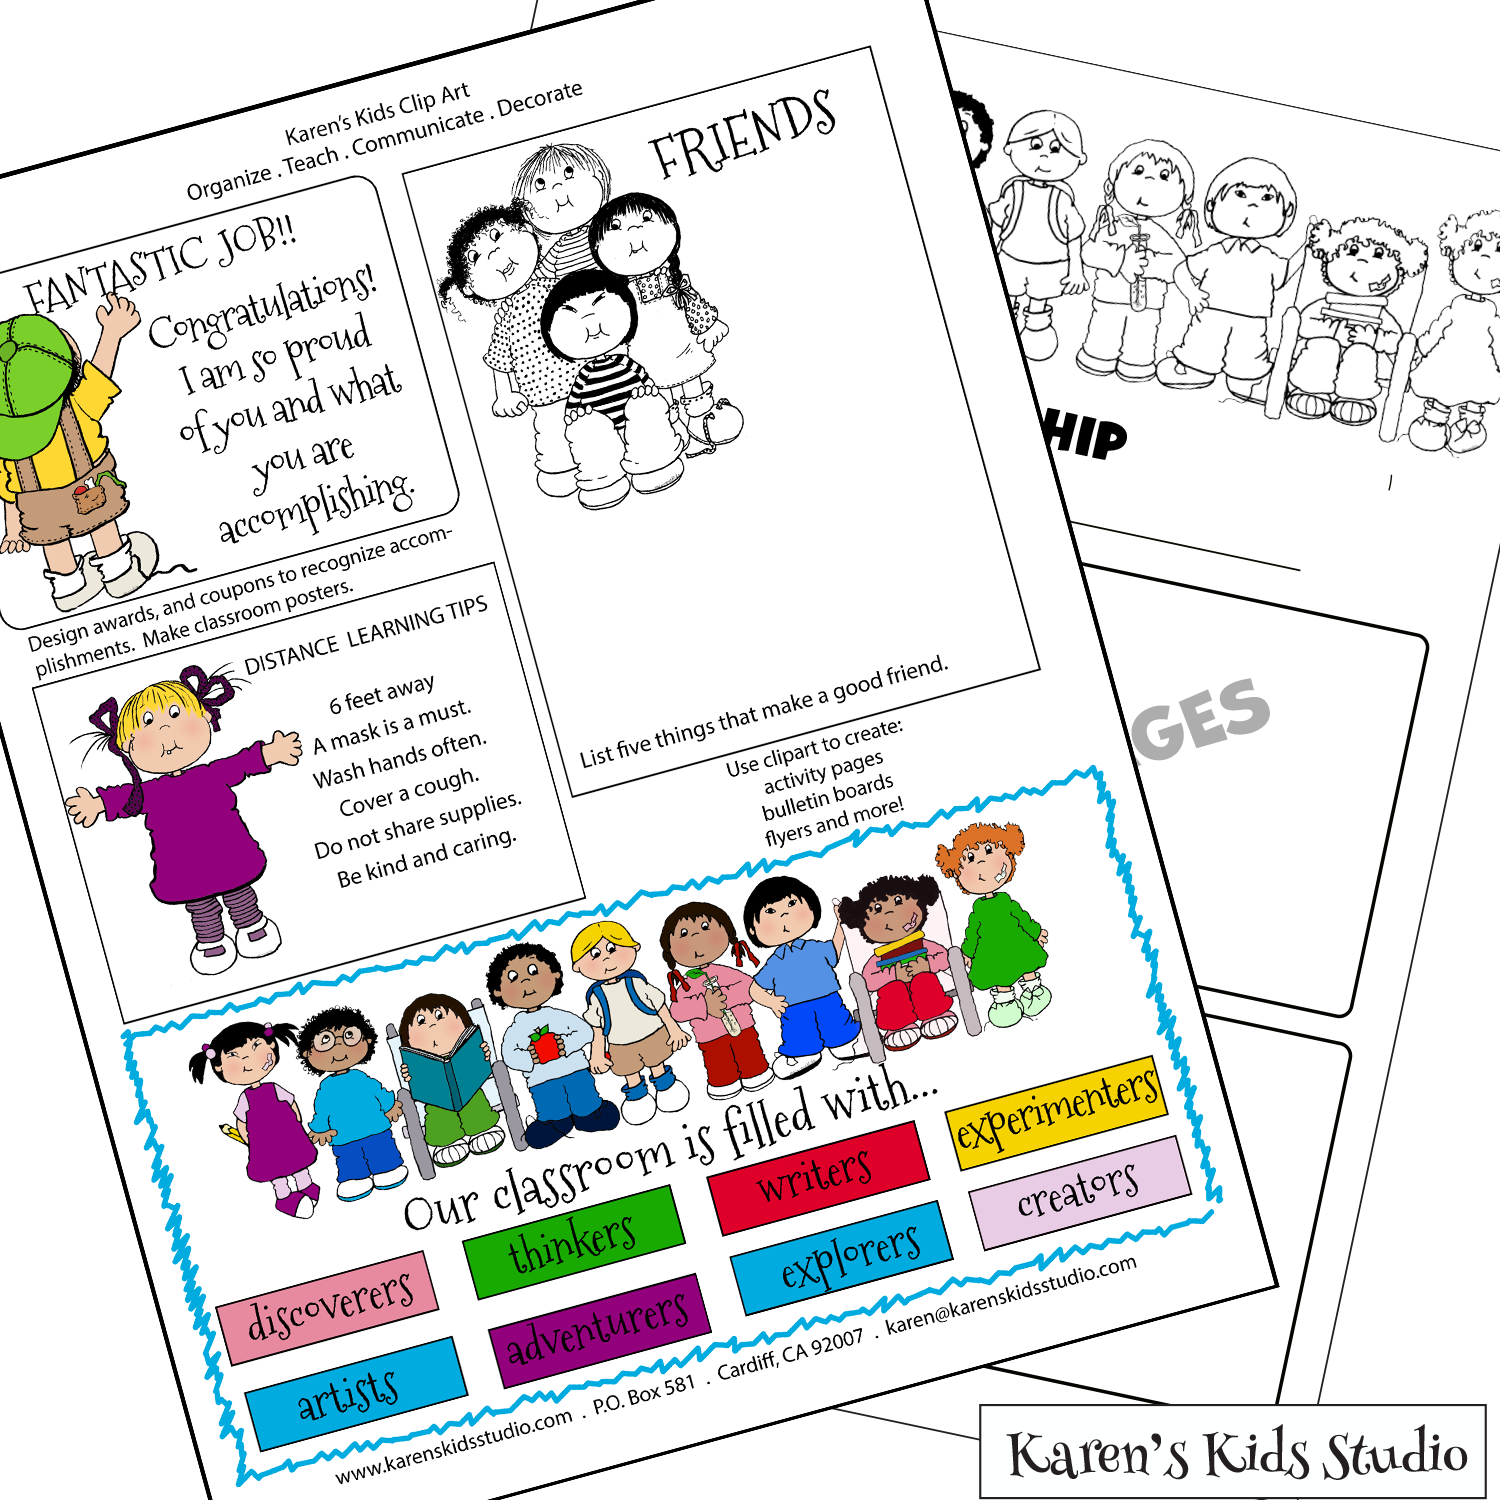 Examples of using clipart full color and black and white. Example of kids coloring page and cute classroom posters in full color.